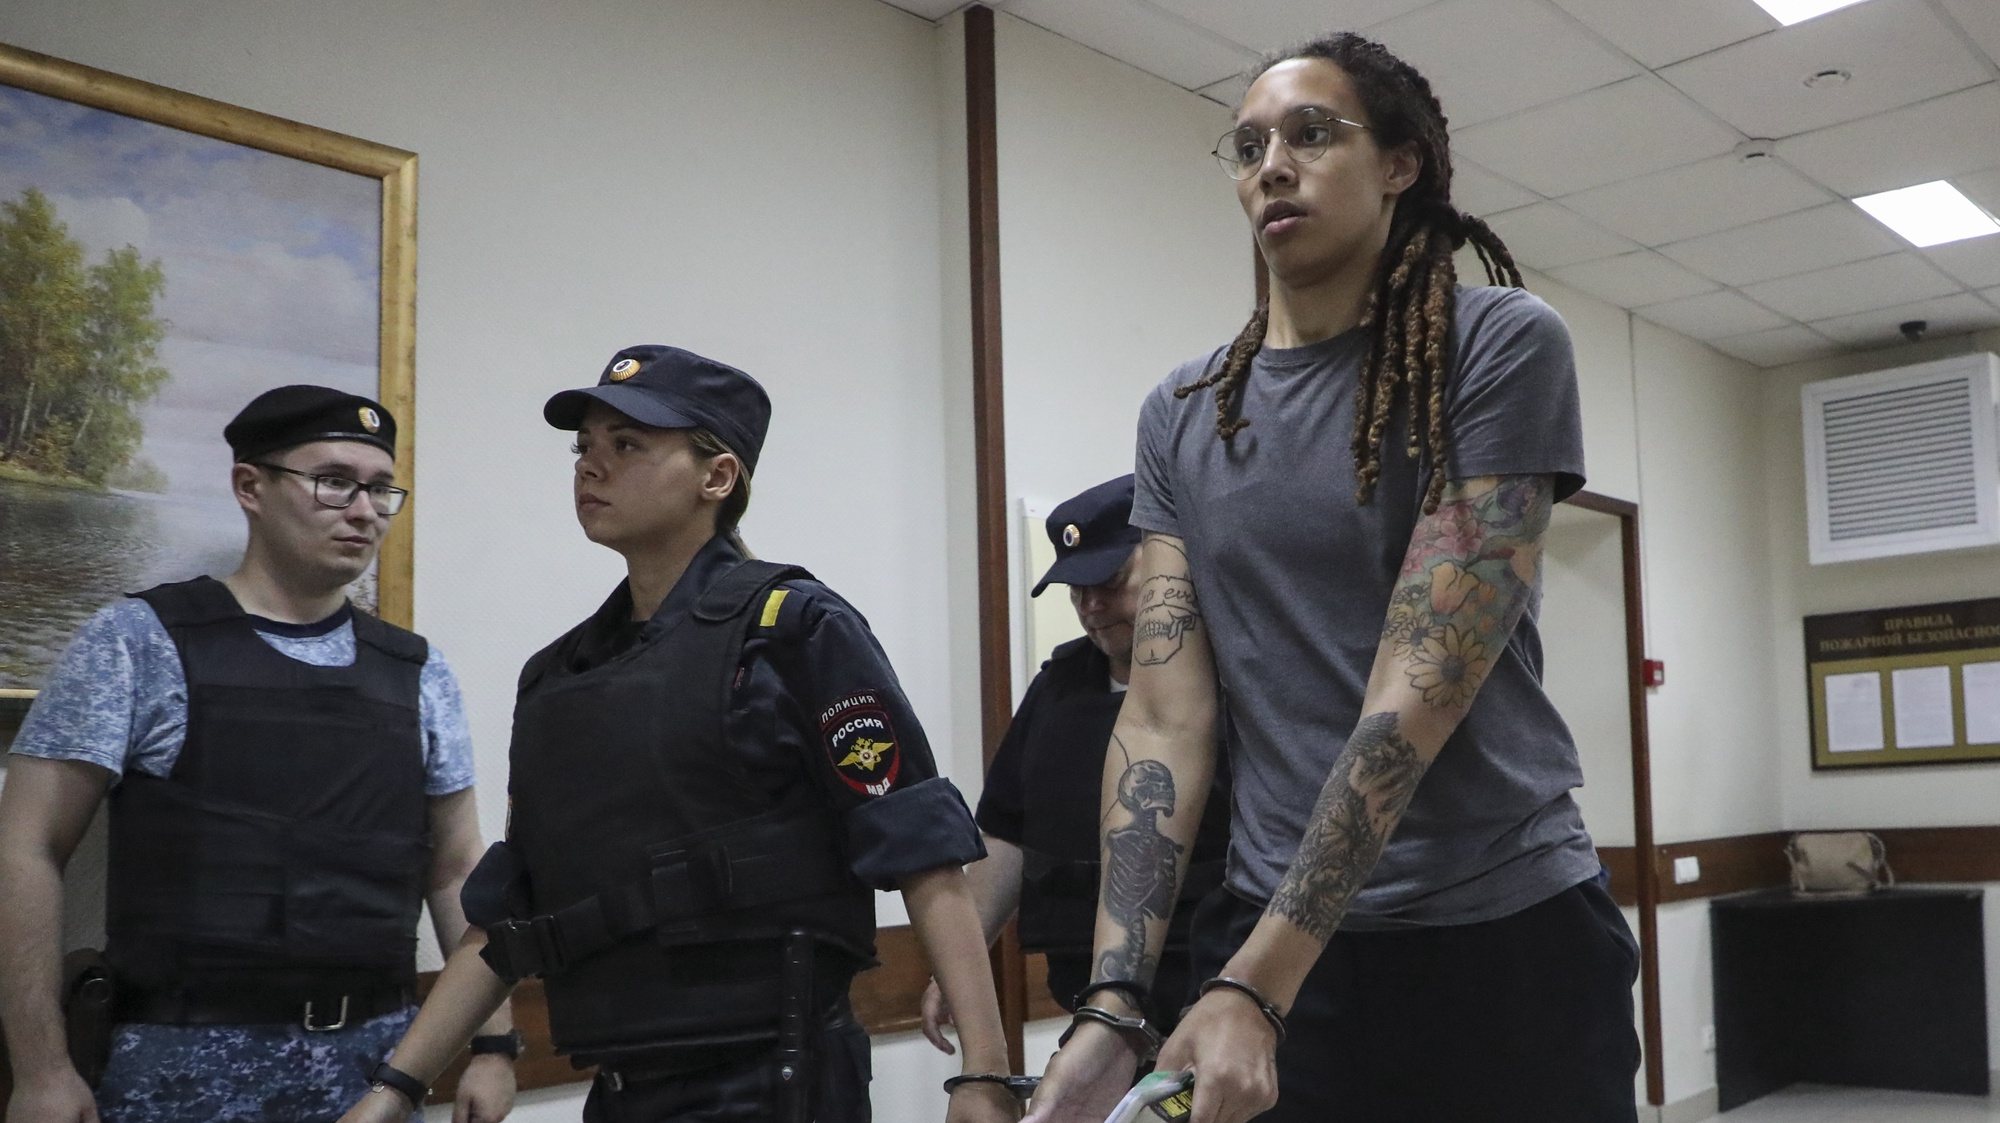 epa10105913 Two-time Olympic gold medalist and WNBA player Brittney Griner (C) is escorted to hear the court&#039;s verdict in Khimki City court in Khimki outside Moscow, Russia, 04 August 2022. The Khimki City Court has sentenced Griner to nine years in prison after finding her guilty on charges of drug smuggling.  EPA/MAXIM SHIPENKOV